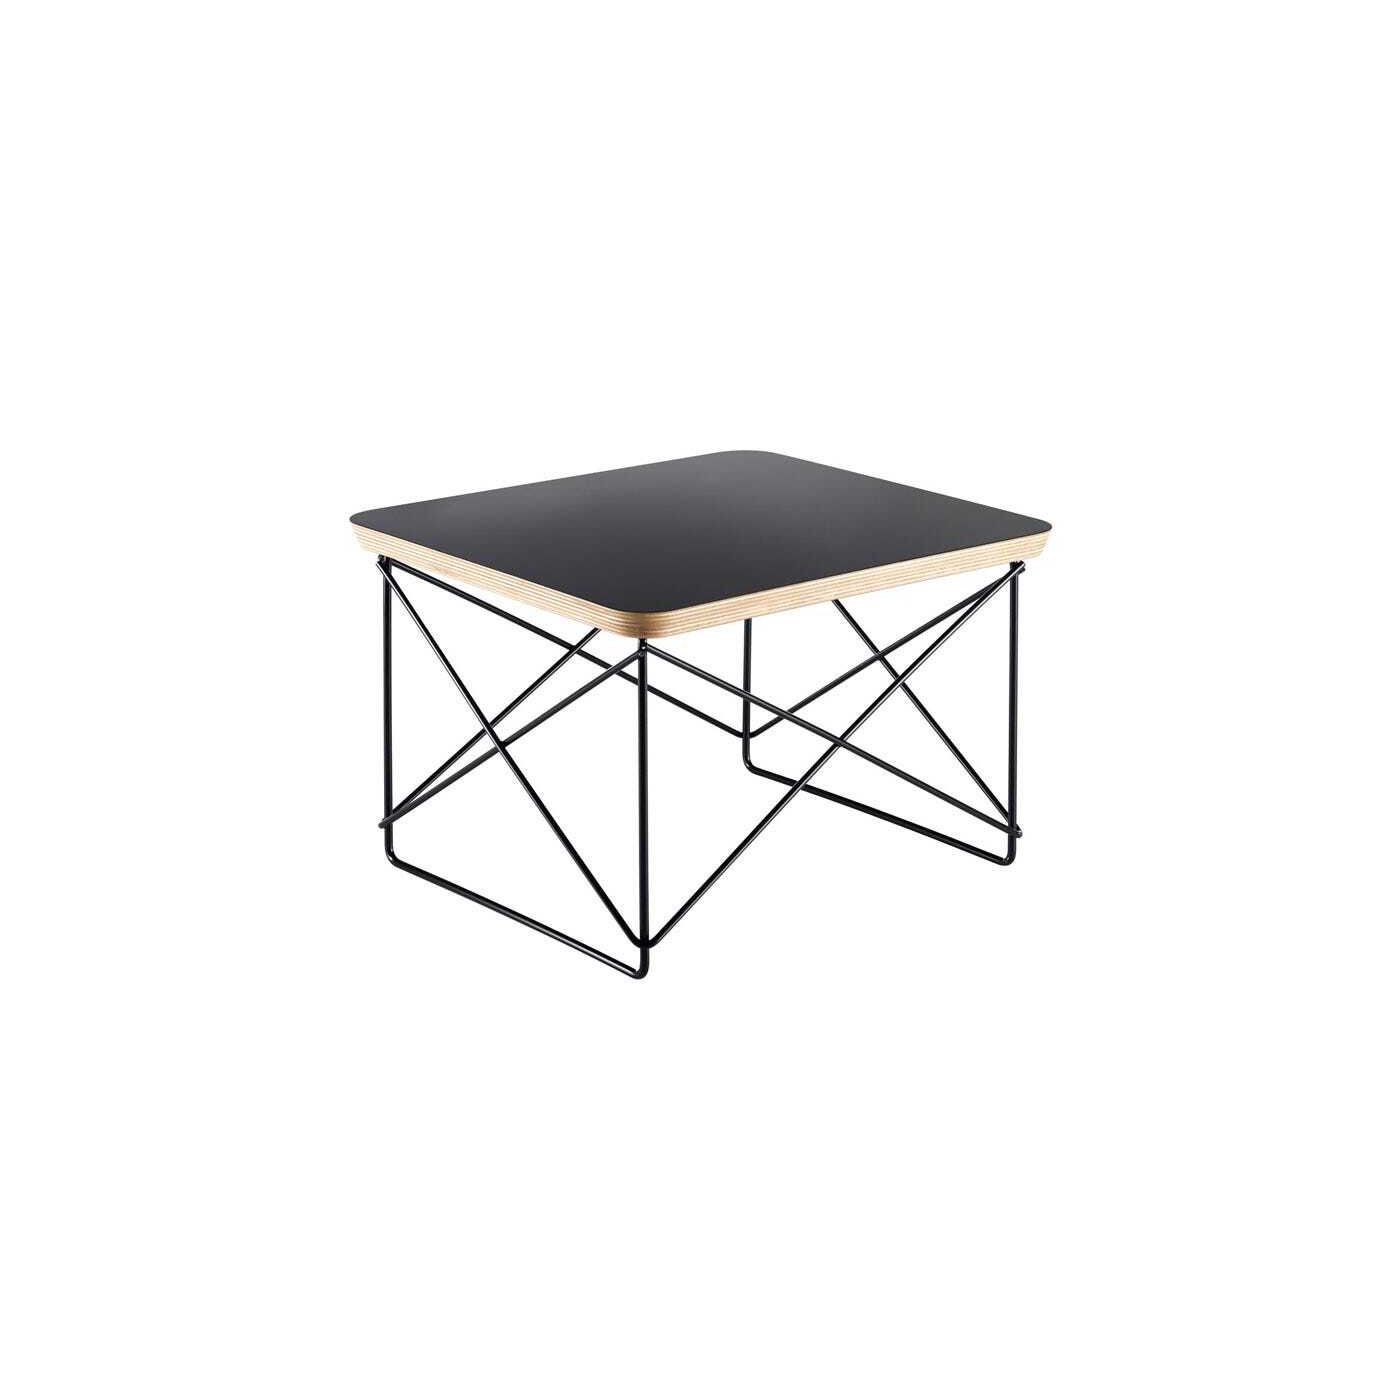 Vitra Occasional Table LTR Black with Basic Dark Legs